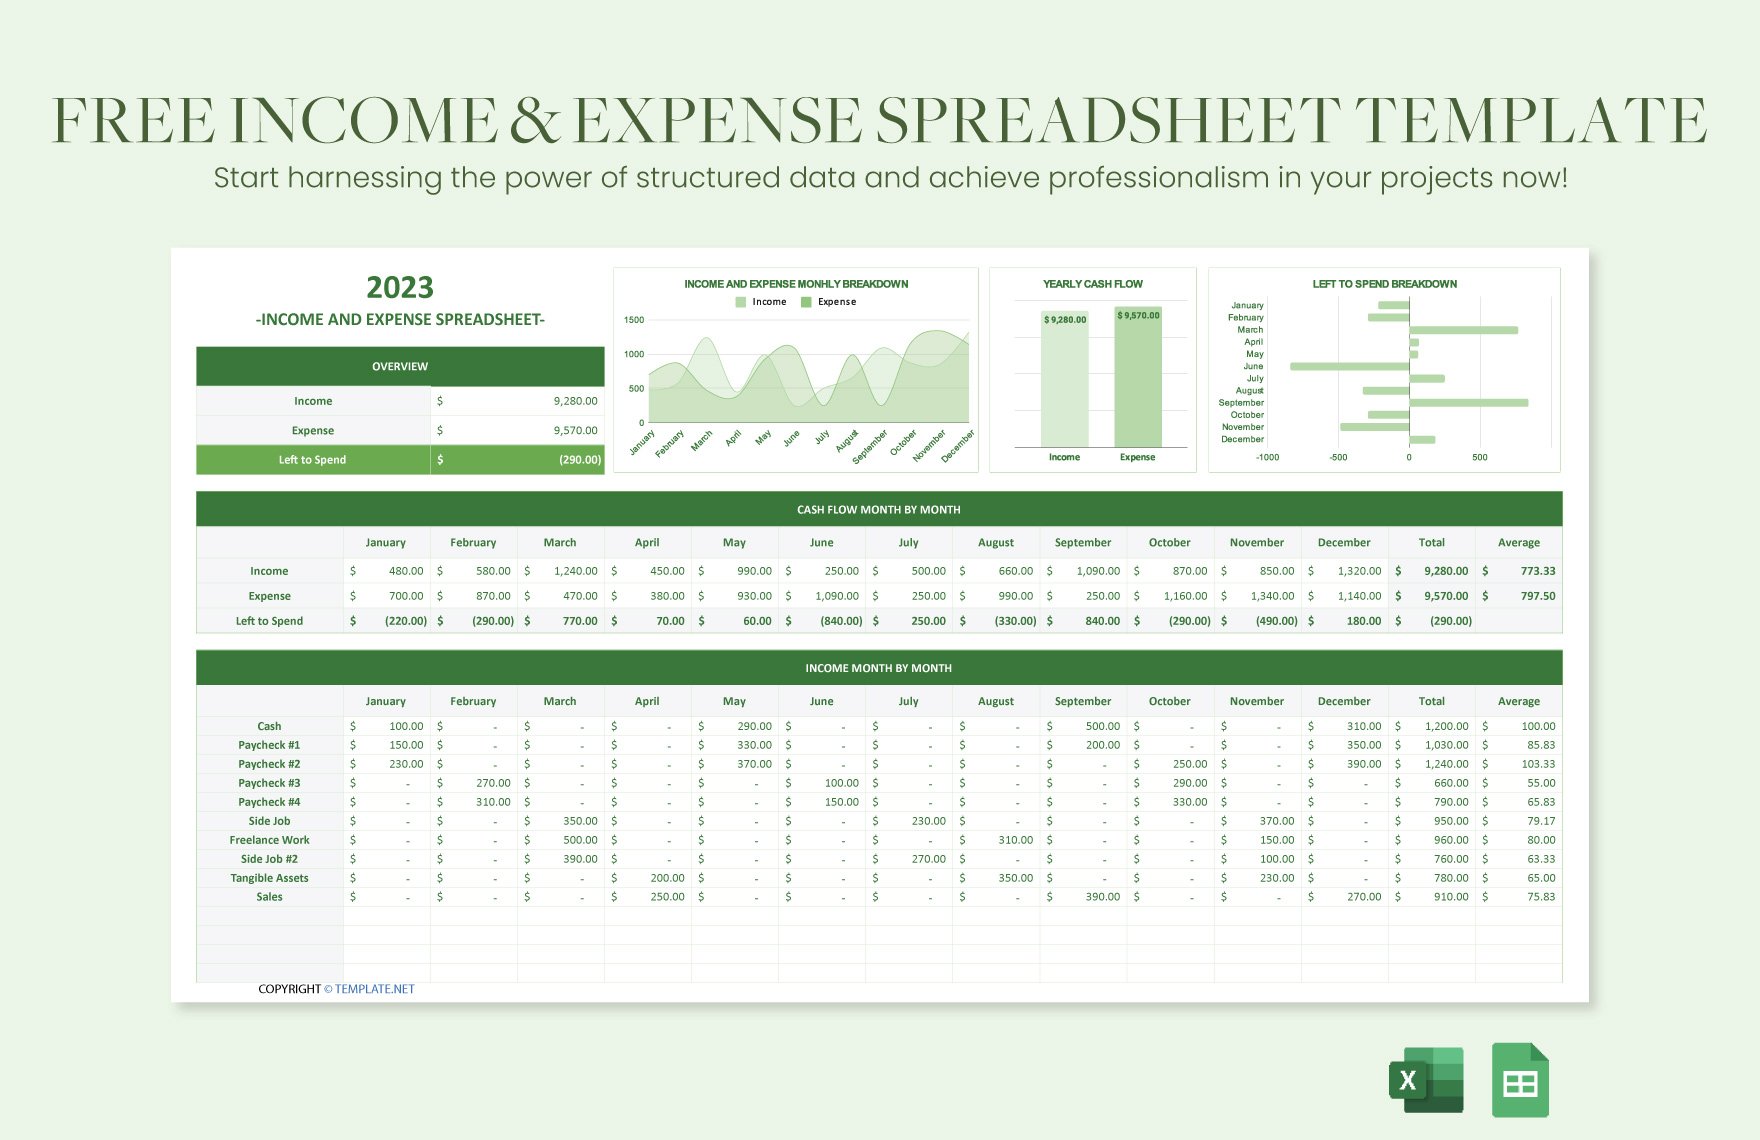 Free Income & Expense Spreadsheet